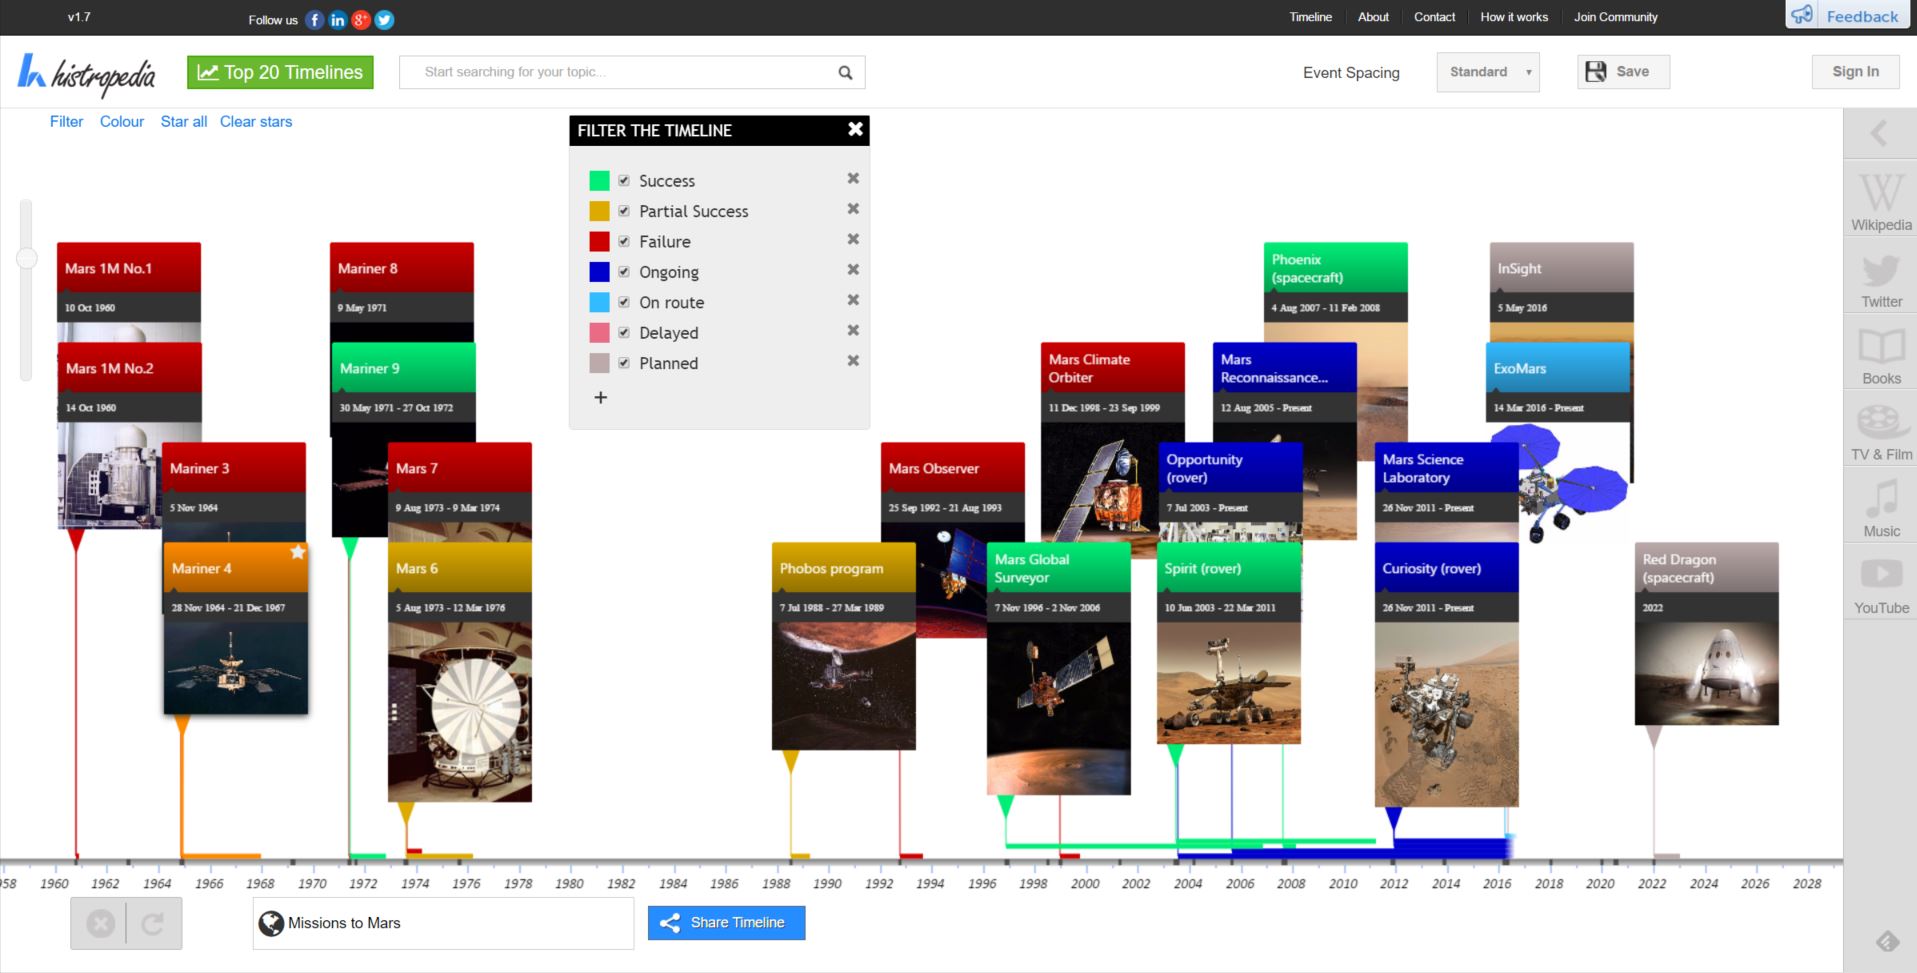 Screenshot of Missions to Mars timelines with colour code and filter panel visible